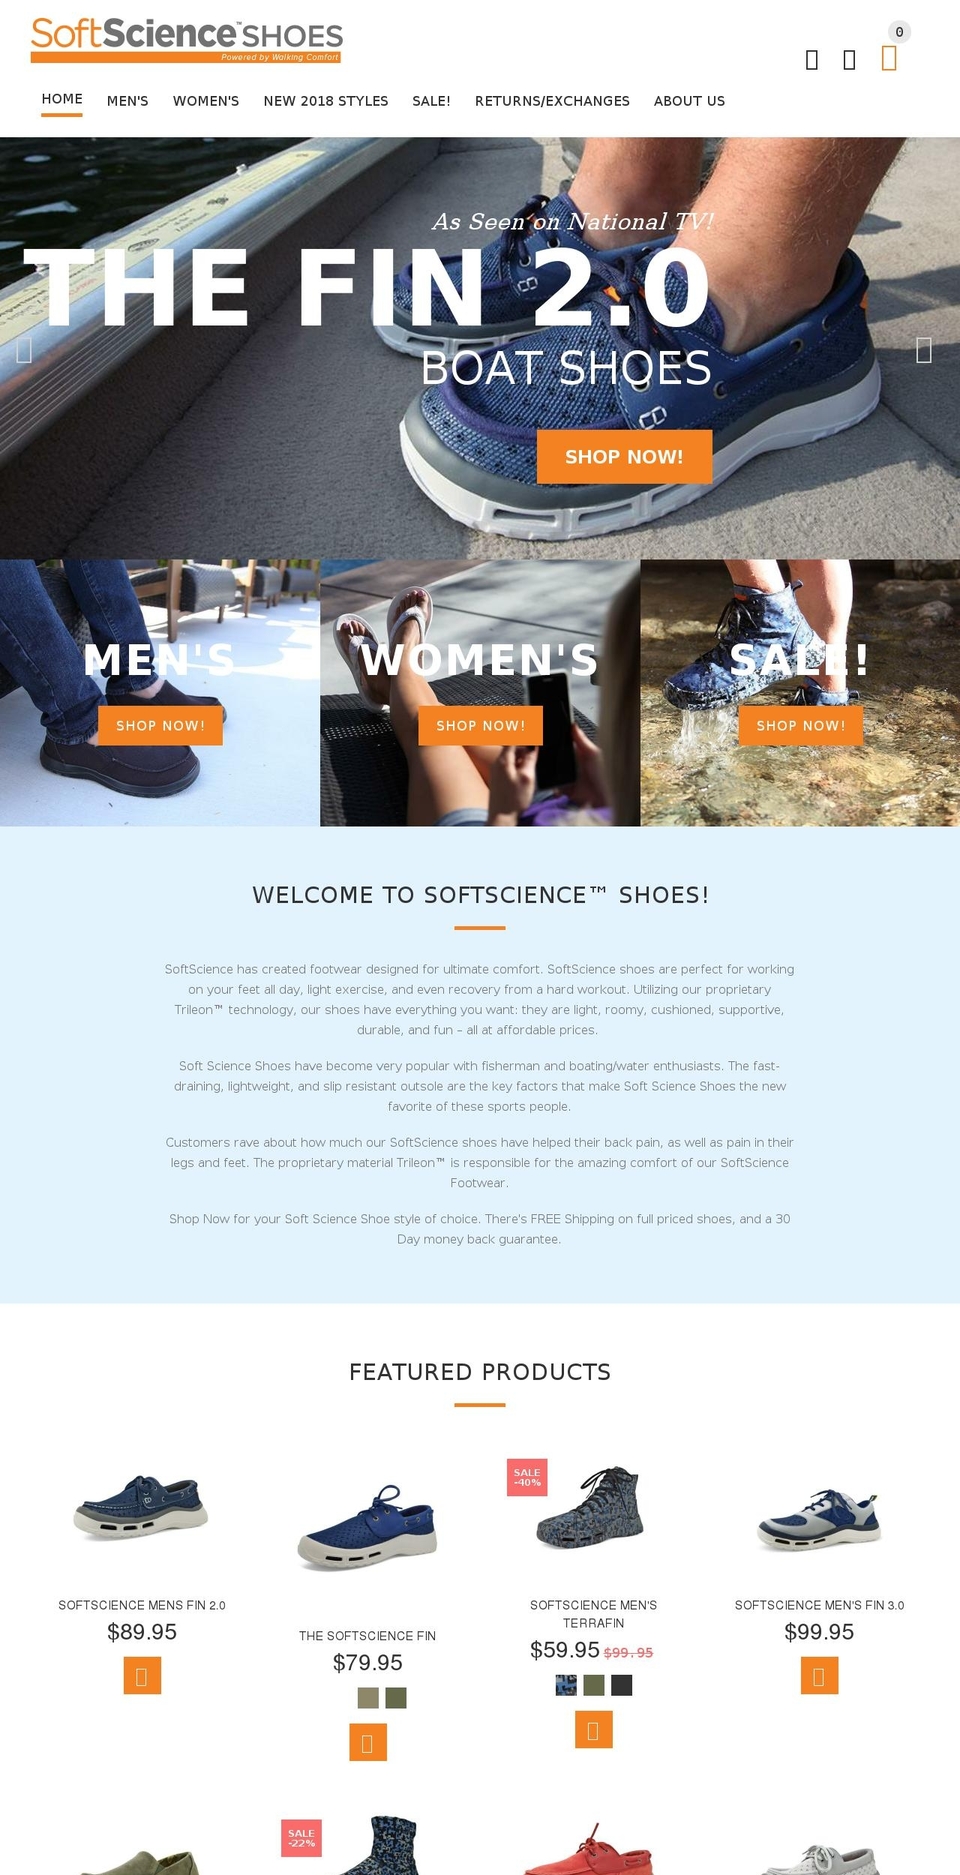 yourstore-v2-1-6 Shopify theme site example softscienceshoes.com